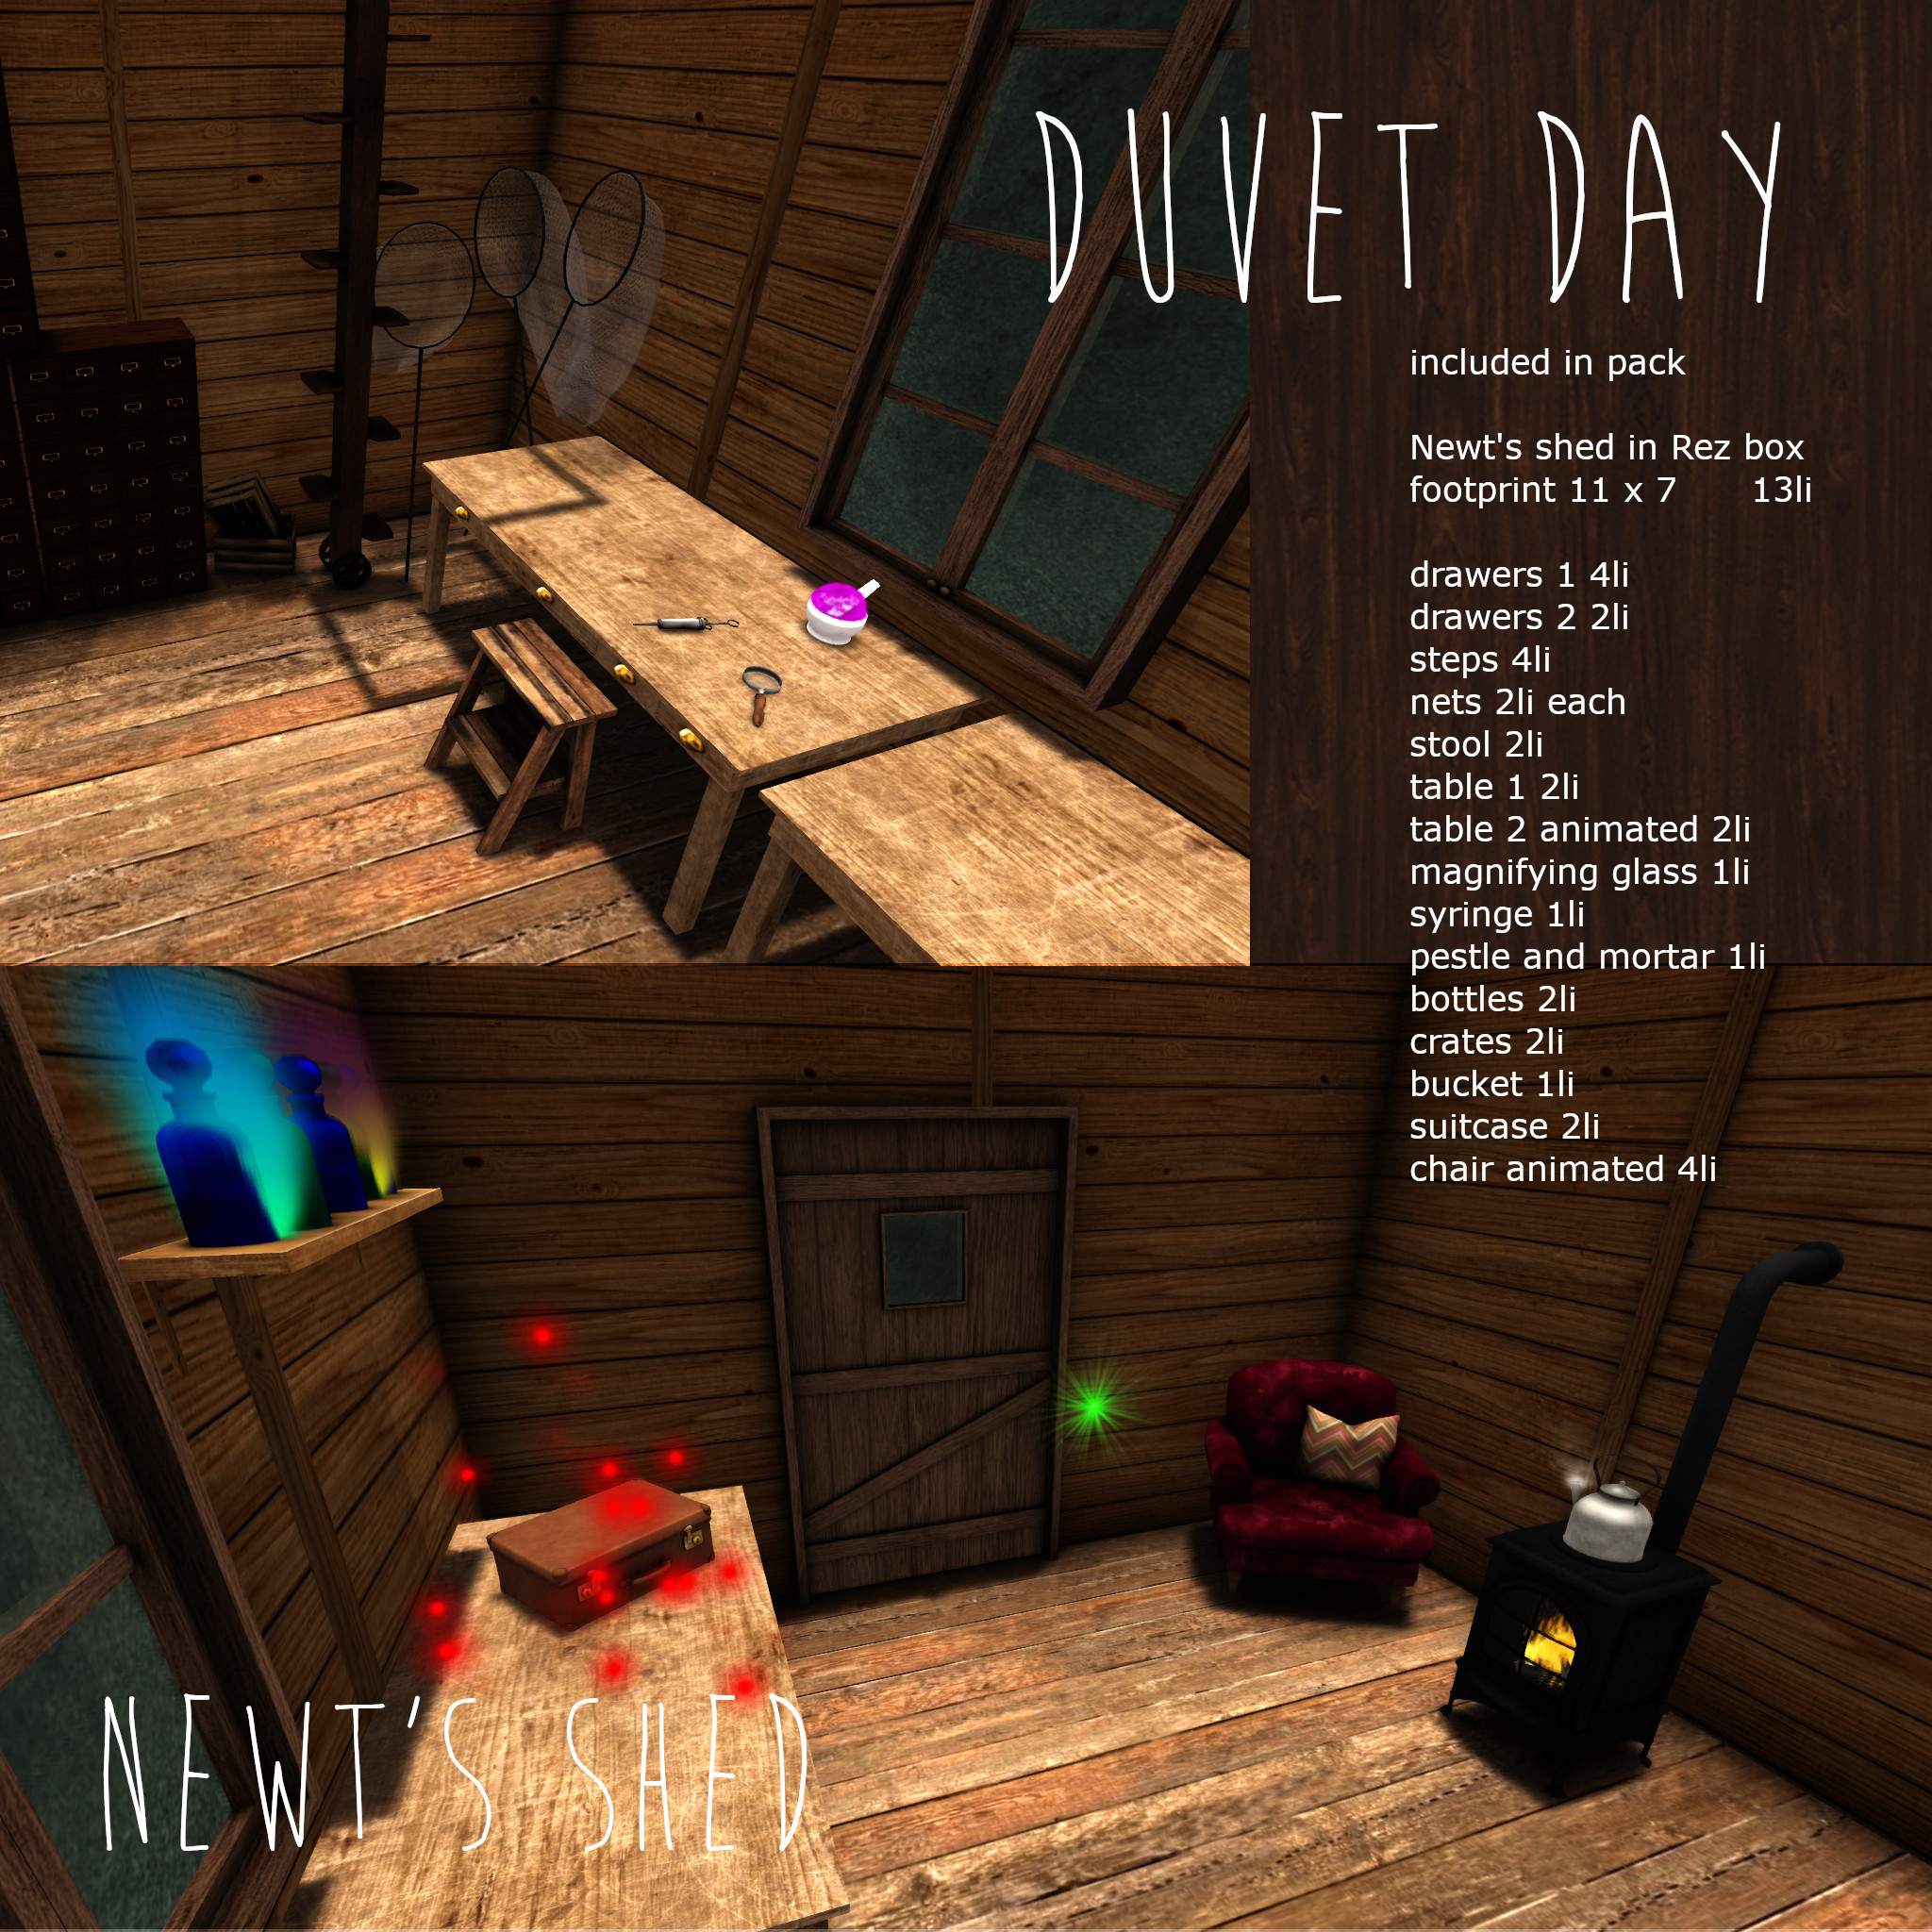 Duvet Day – Newt’s Shed